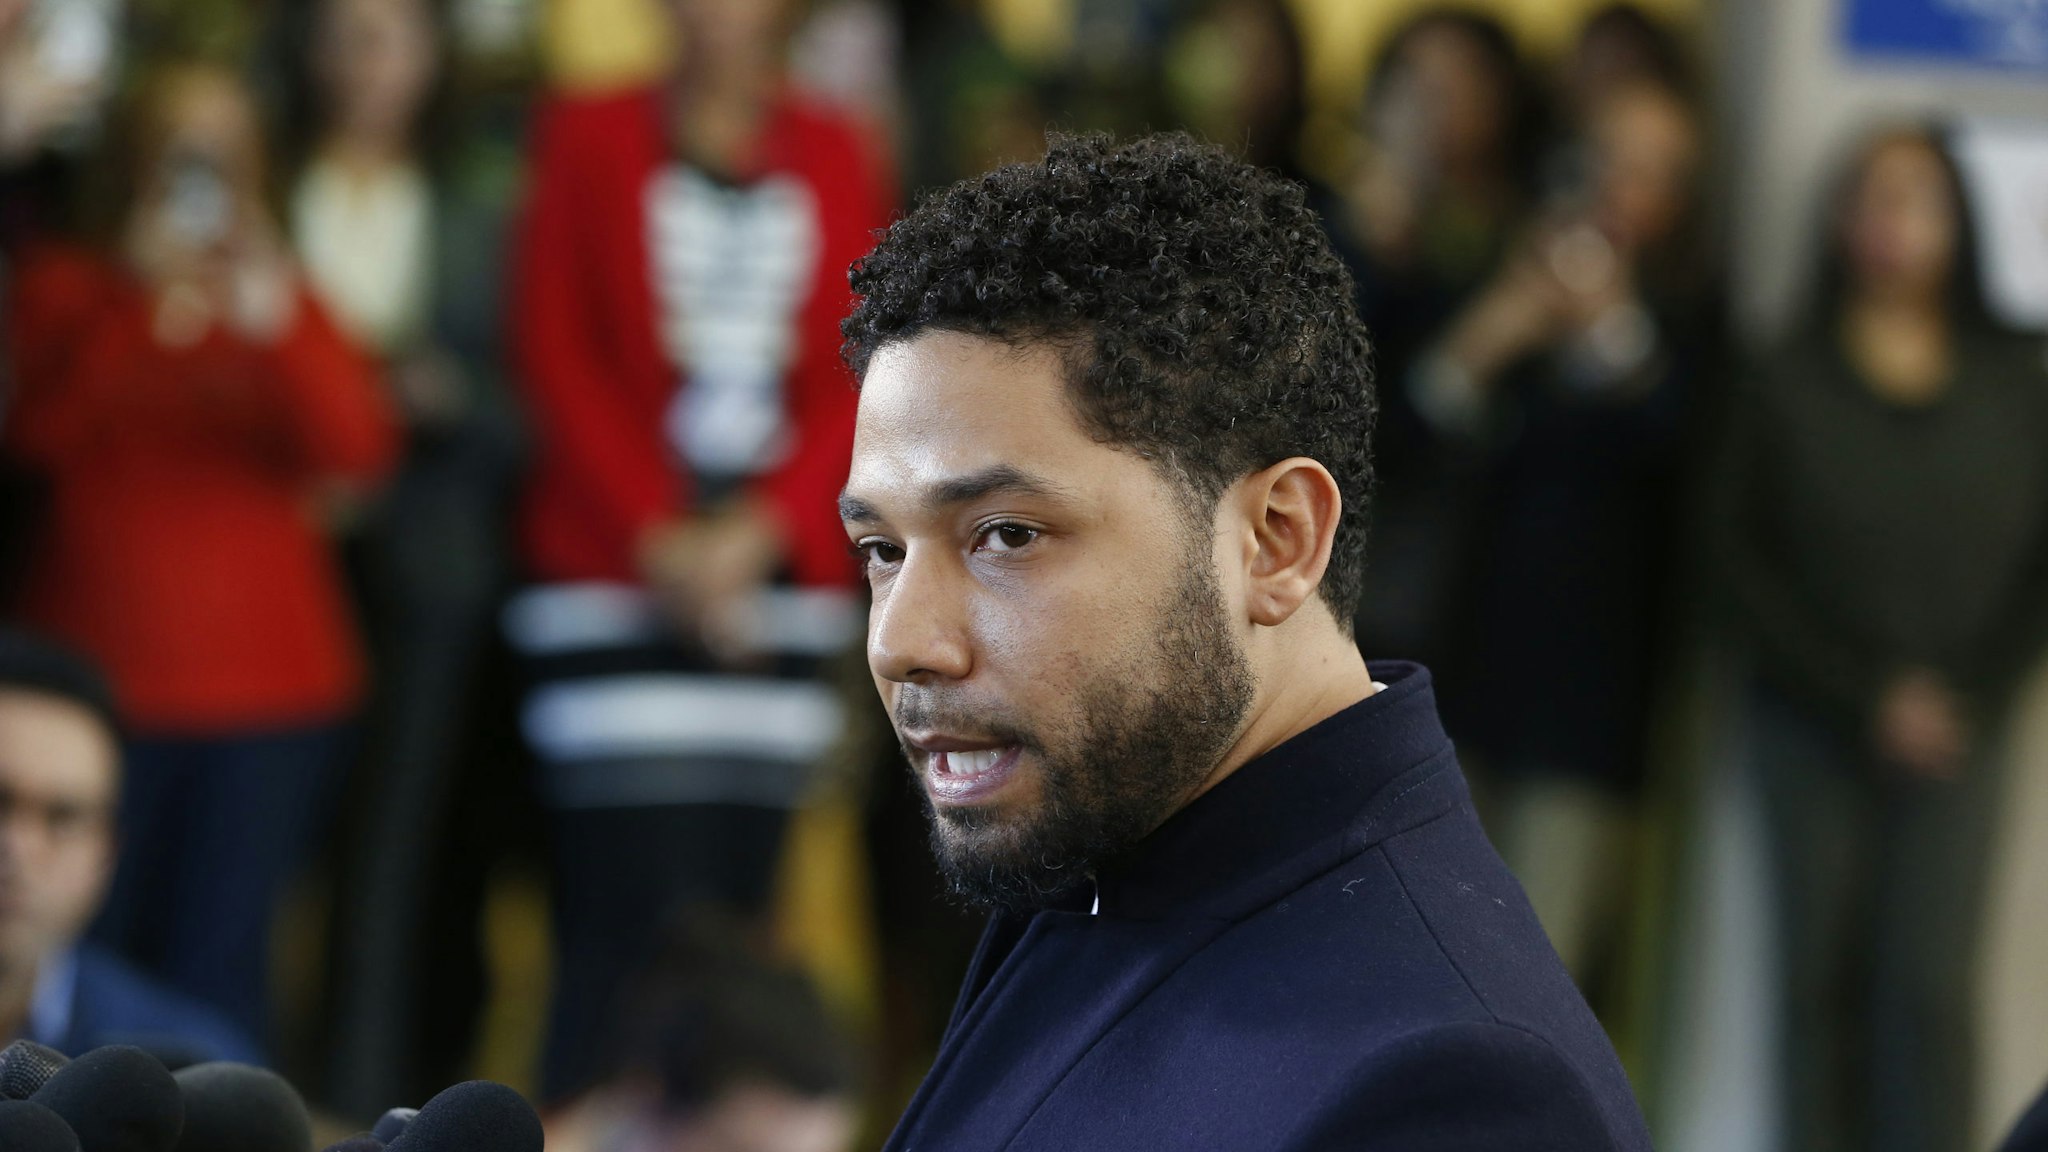 CHICAGO, ILLINOIS - MARCH 26: Actor Jussie Smollett speaks with members of the media after his court appearance at Leighton Courthouse on March 26, 2019 in Chicago, Illinois. This morning in court it was announced that all charges were dropped against the actor. (Photo by Nuccio DiNuzzo/Getty Images)